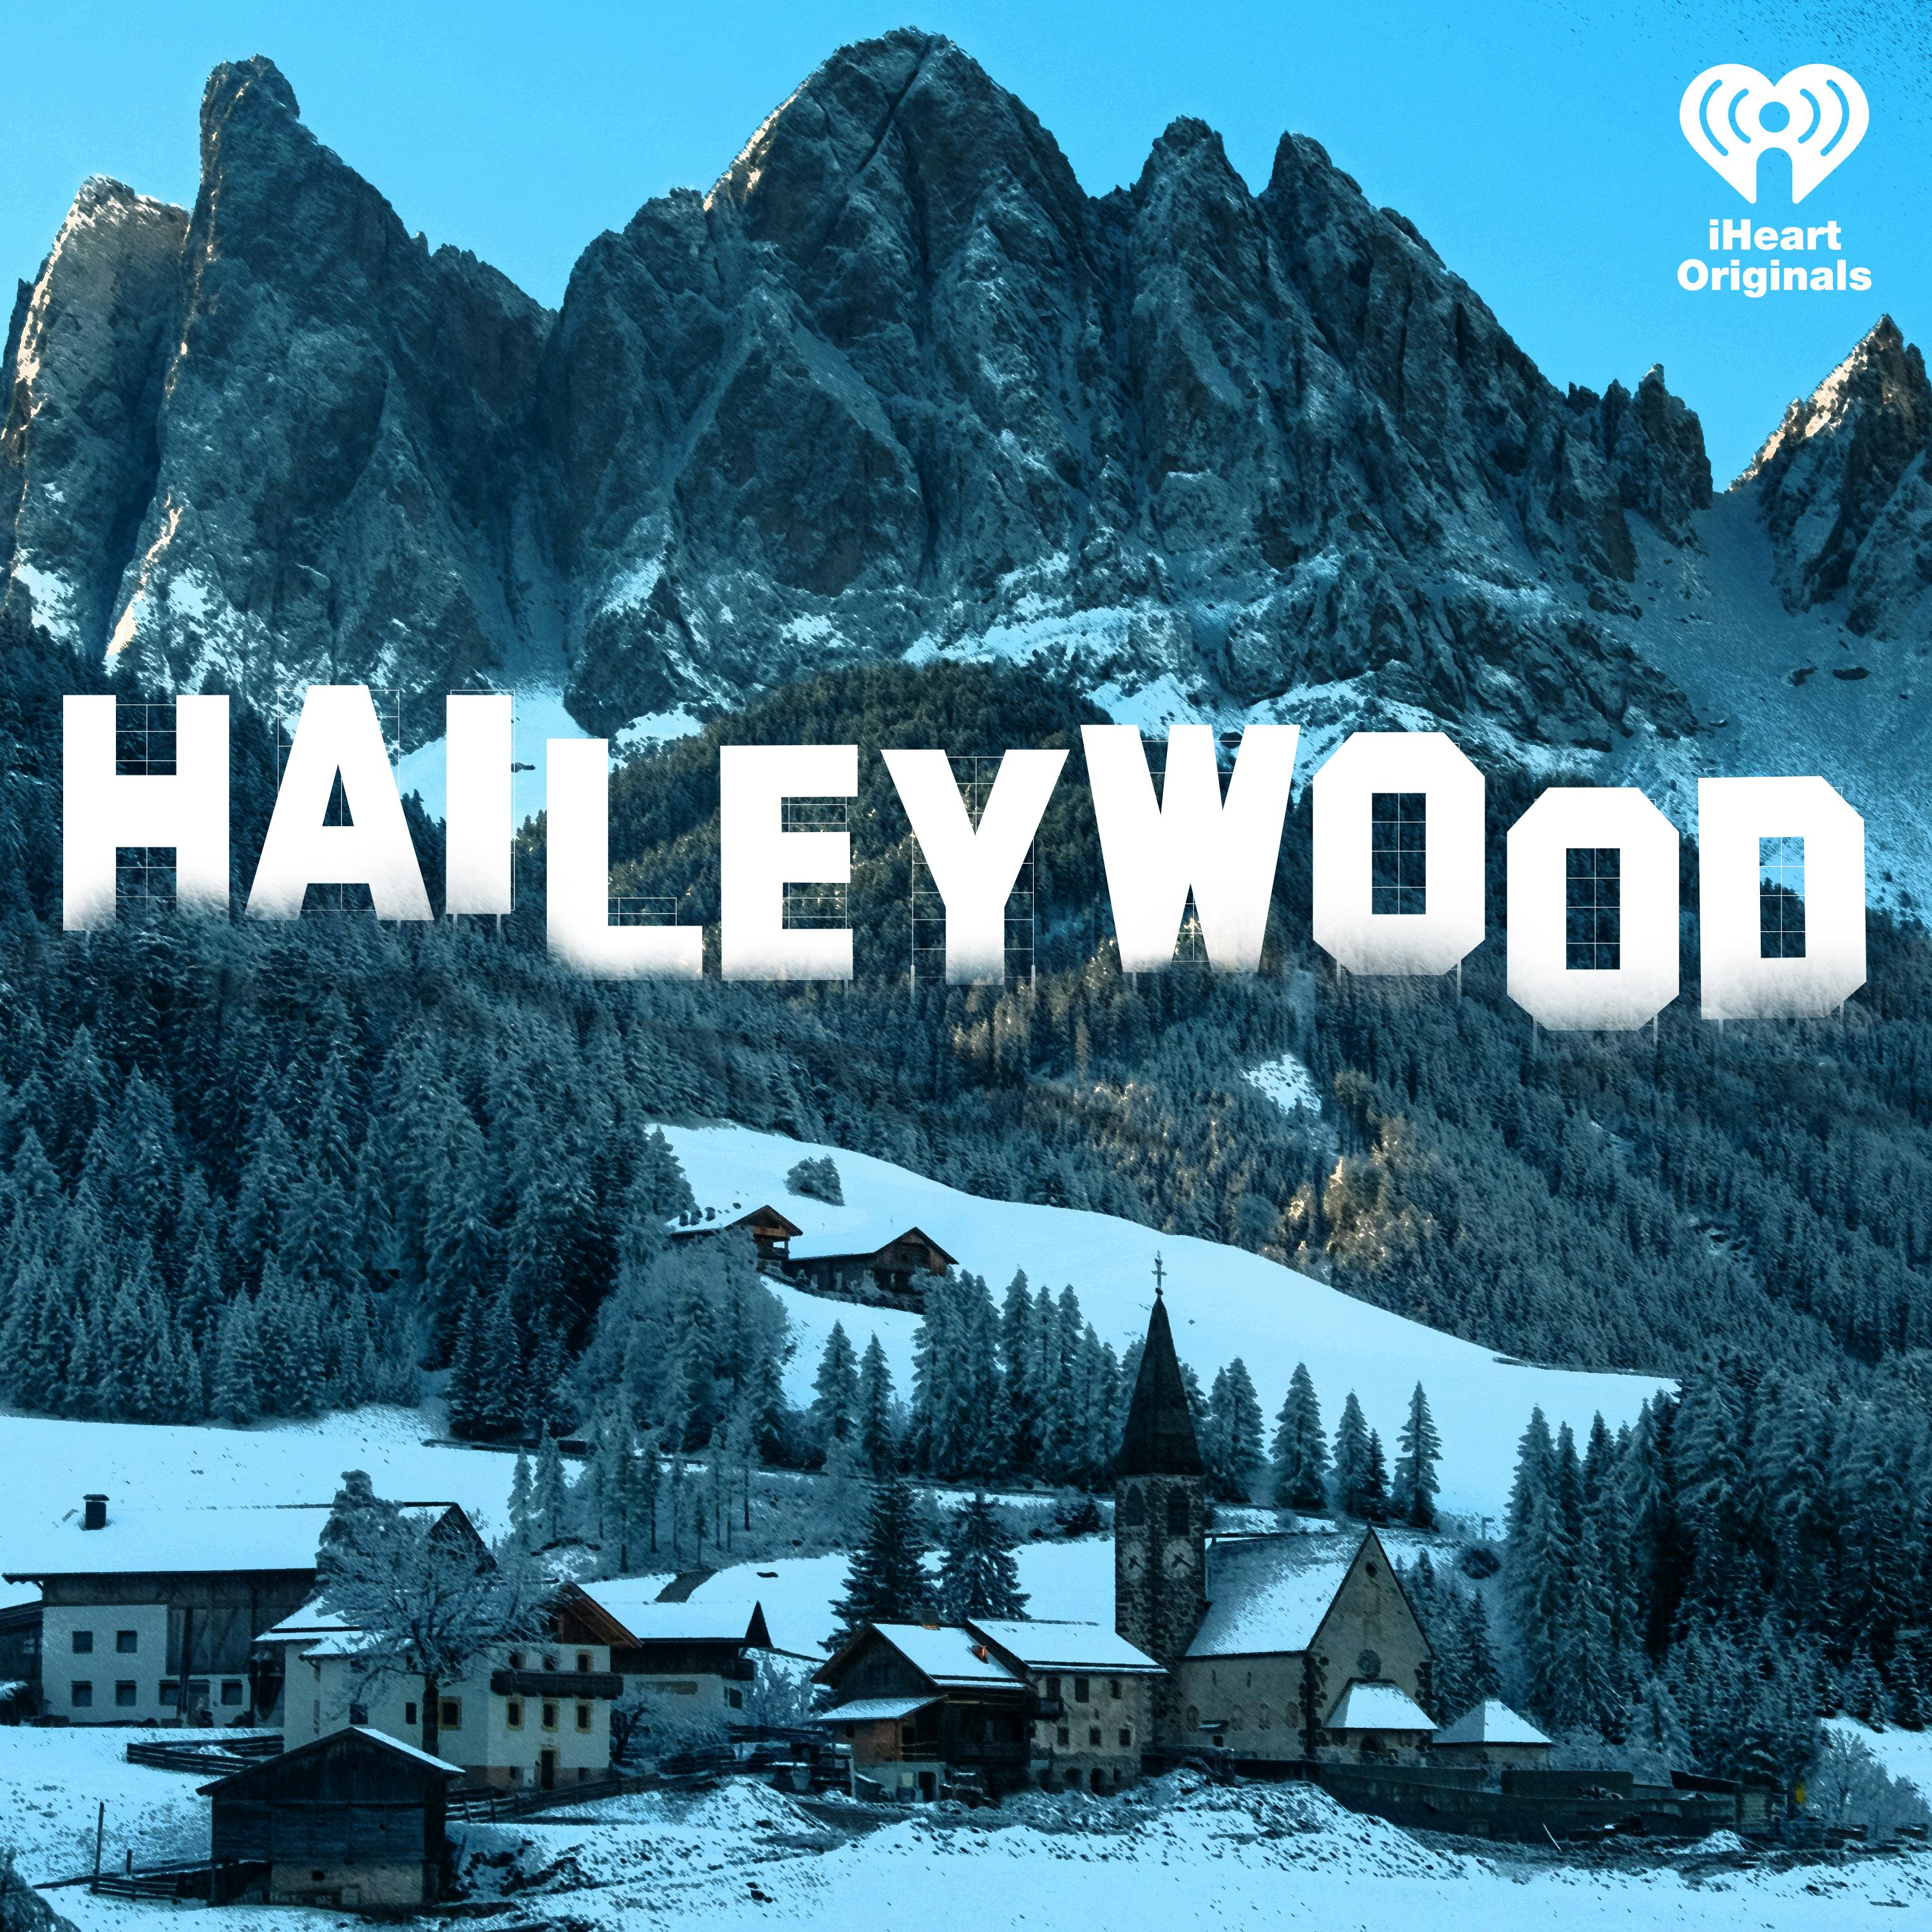 ‘Haileywood:’ Small Town Meets Bruce Willis